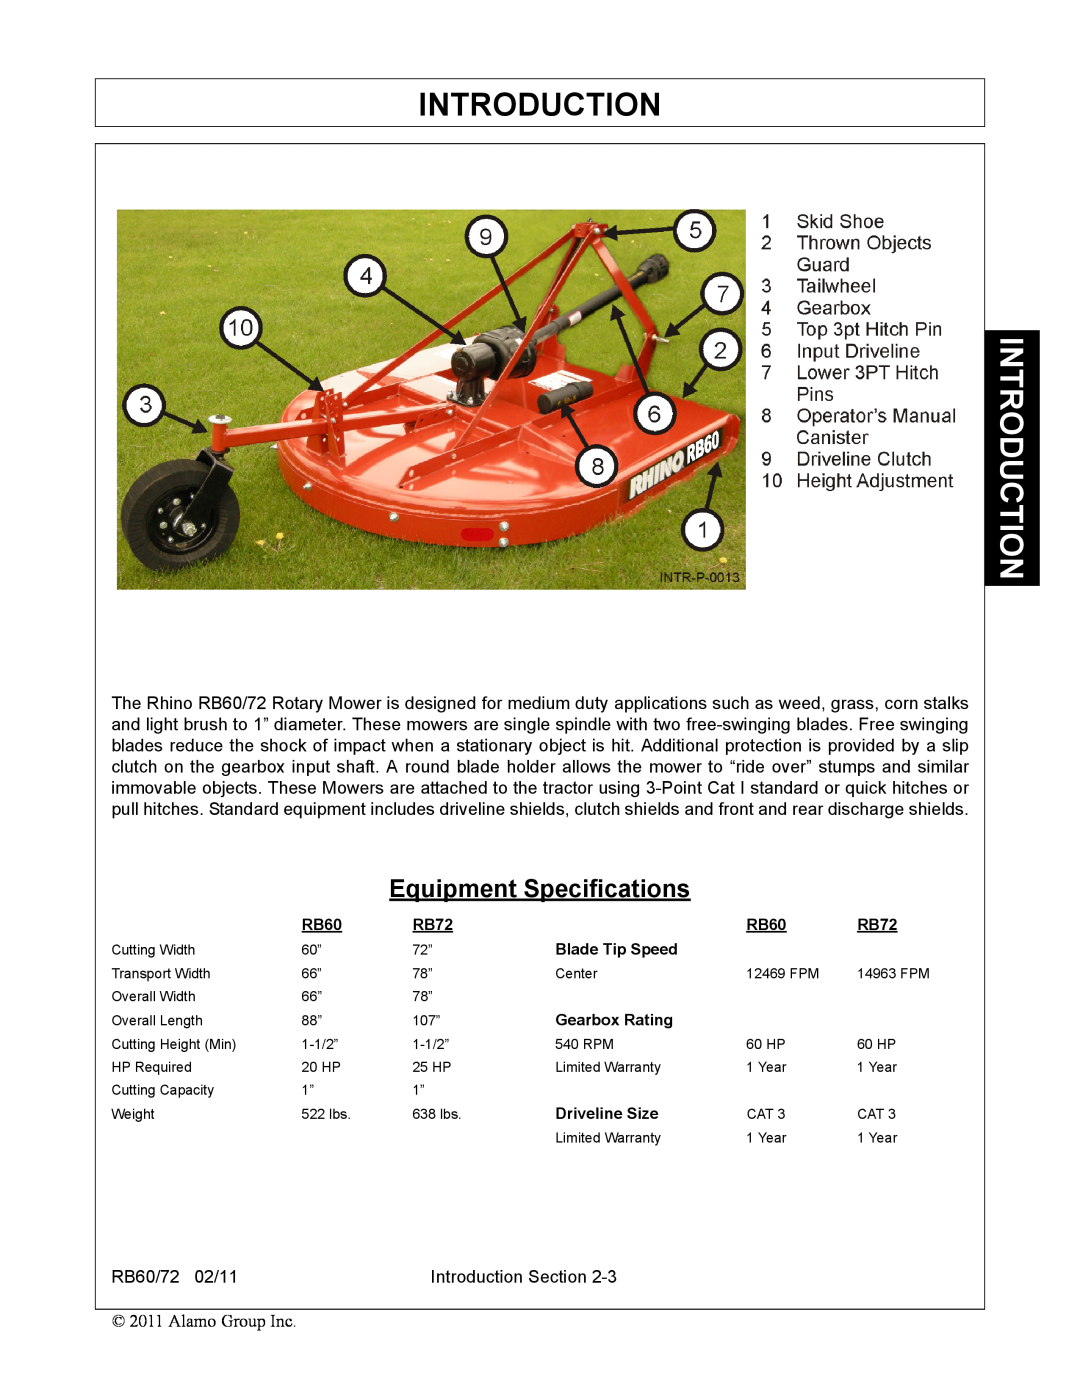 Blue Rhino RB60/72 manual Equipment Specifications, Introduction 